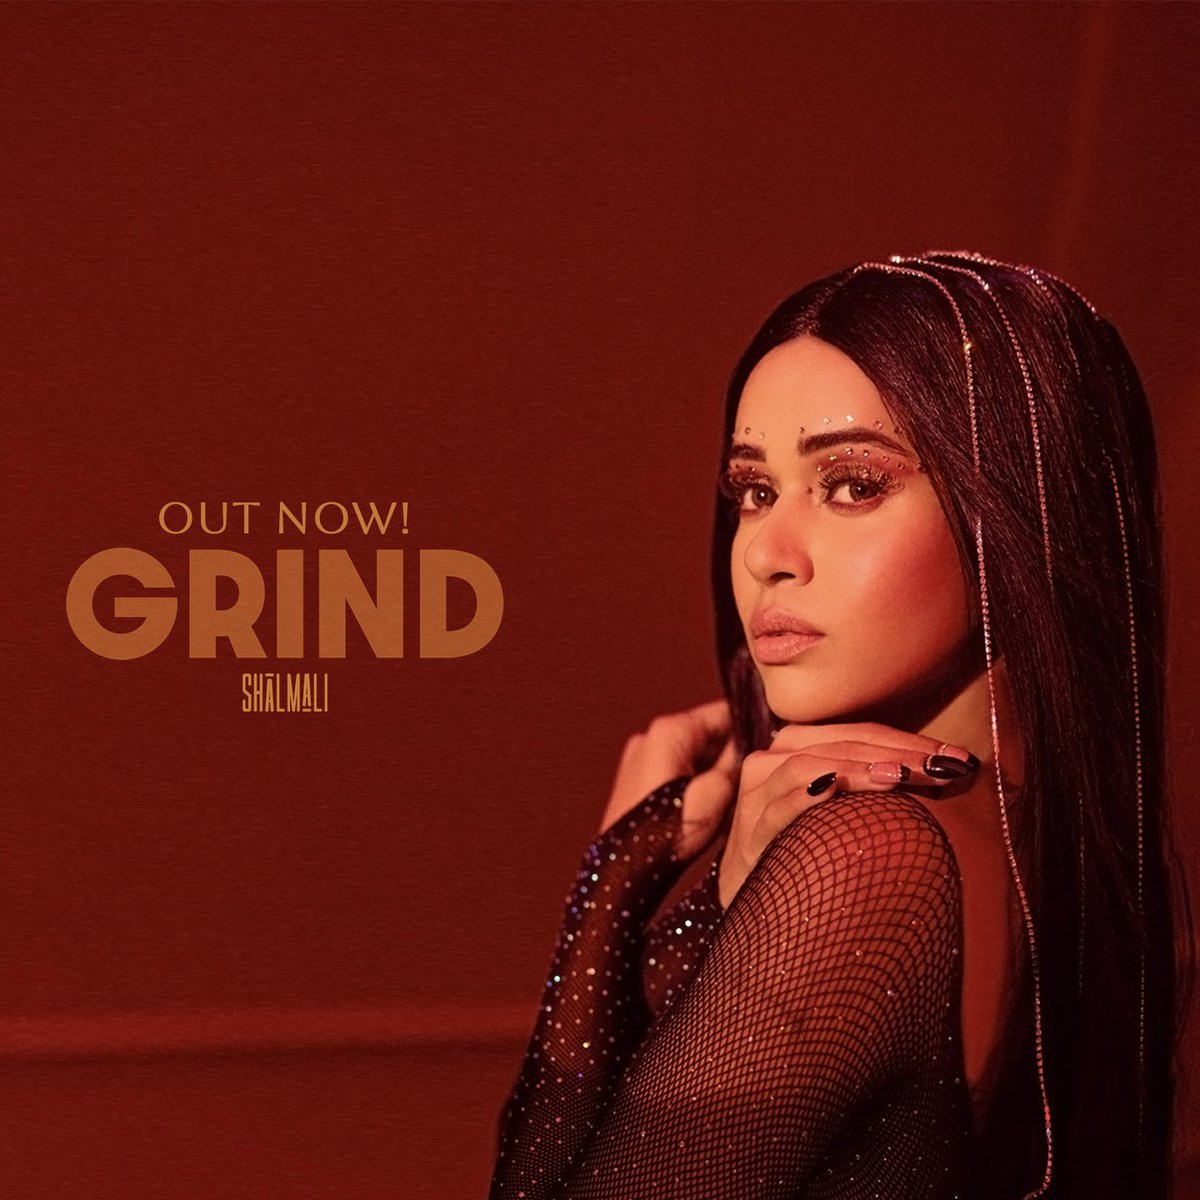 GRIND is out now on all streaming platforms! Go listen now!